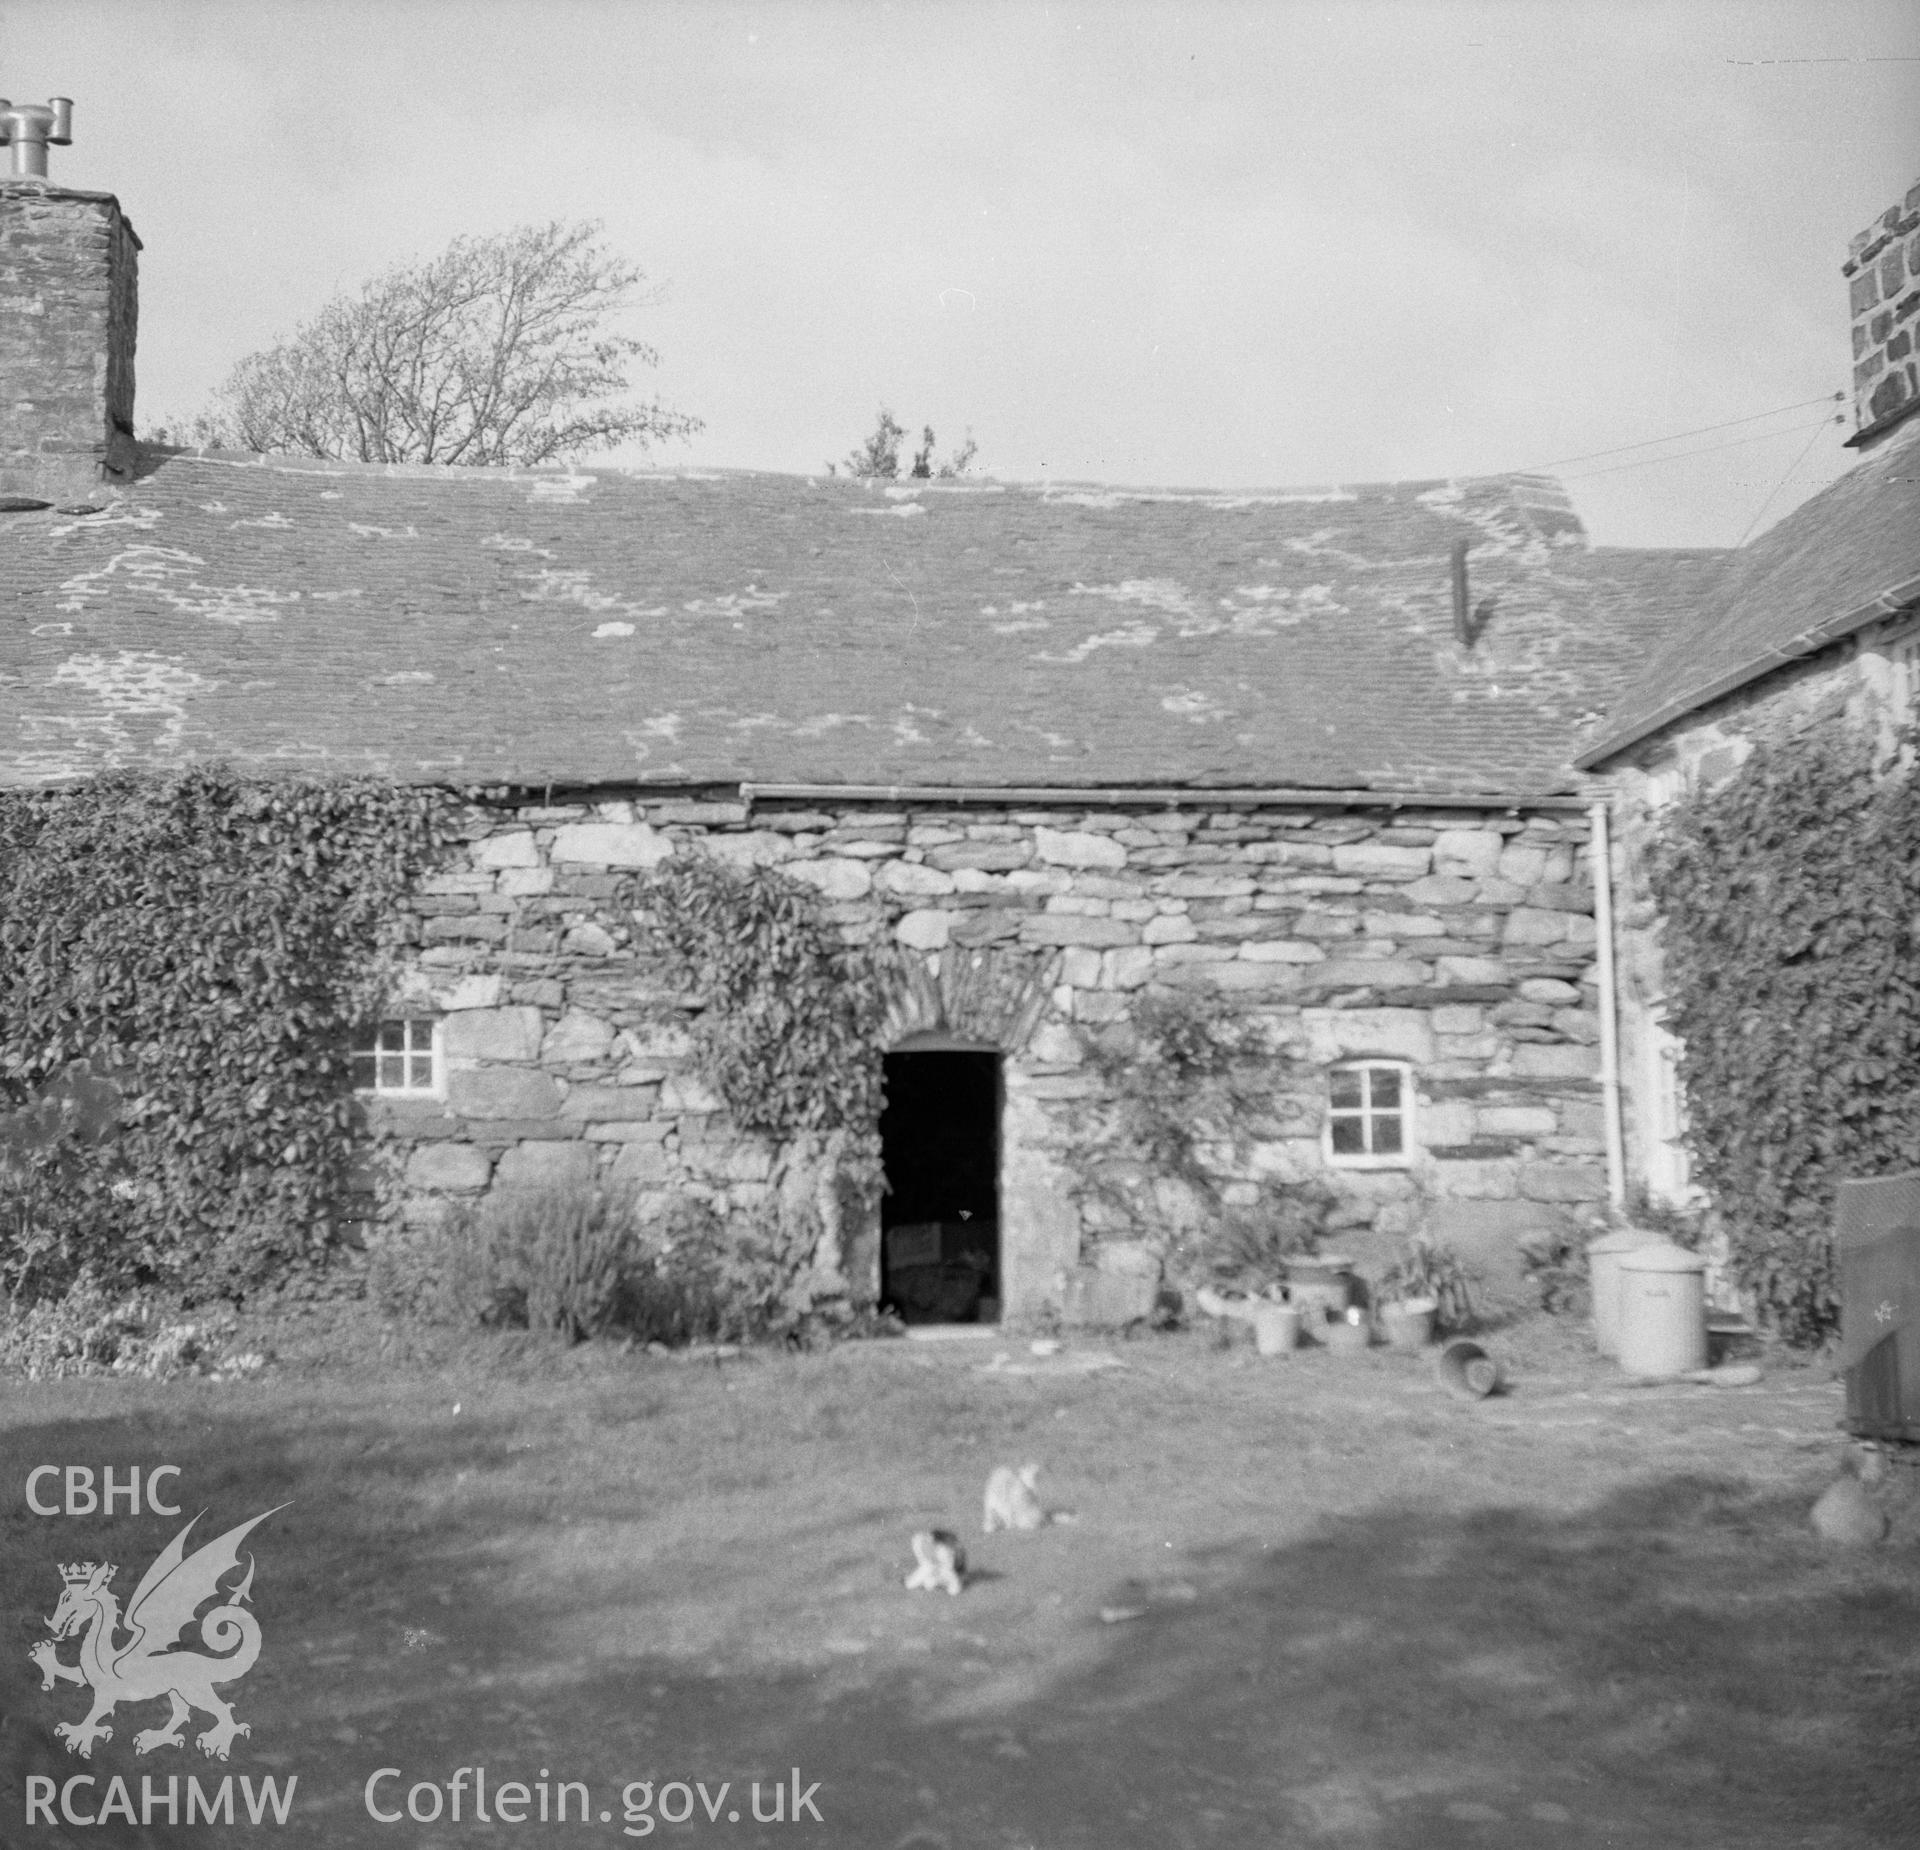 Digital copy of a black and white nitrate negative showing exterior view of Coed Mawr, Merioneth.